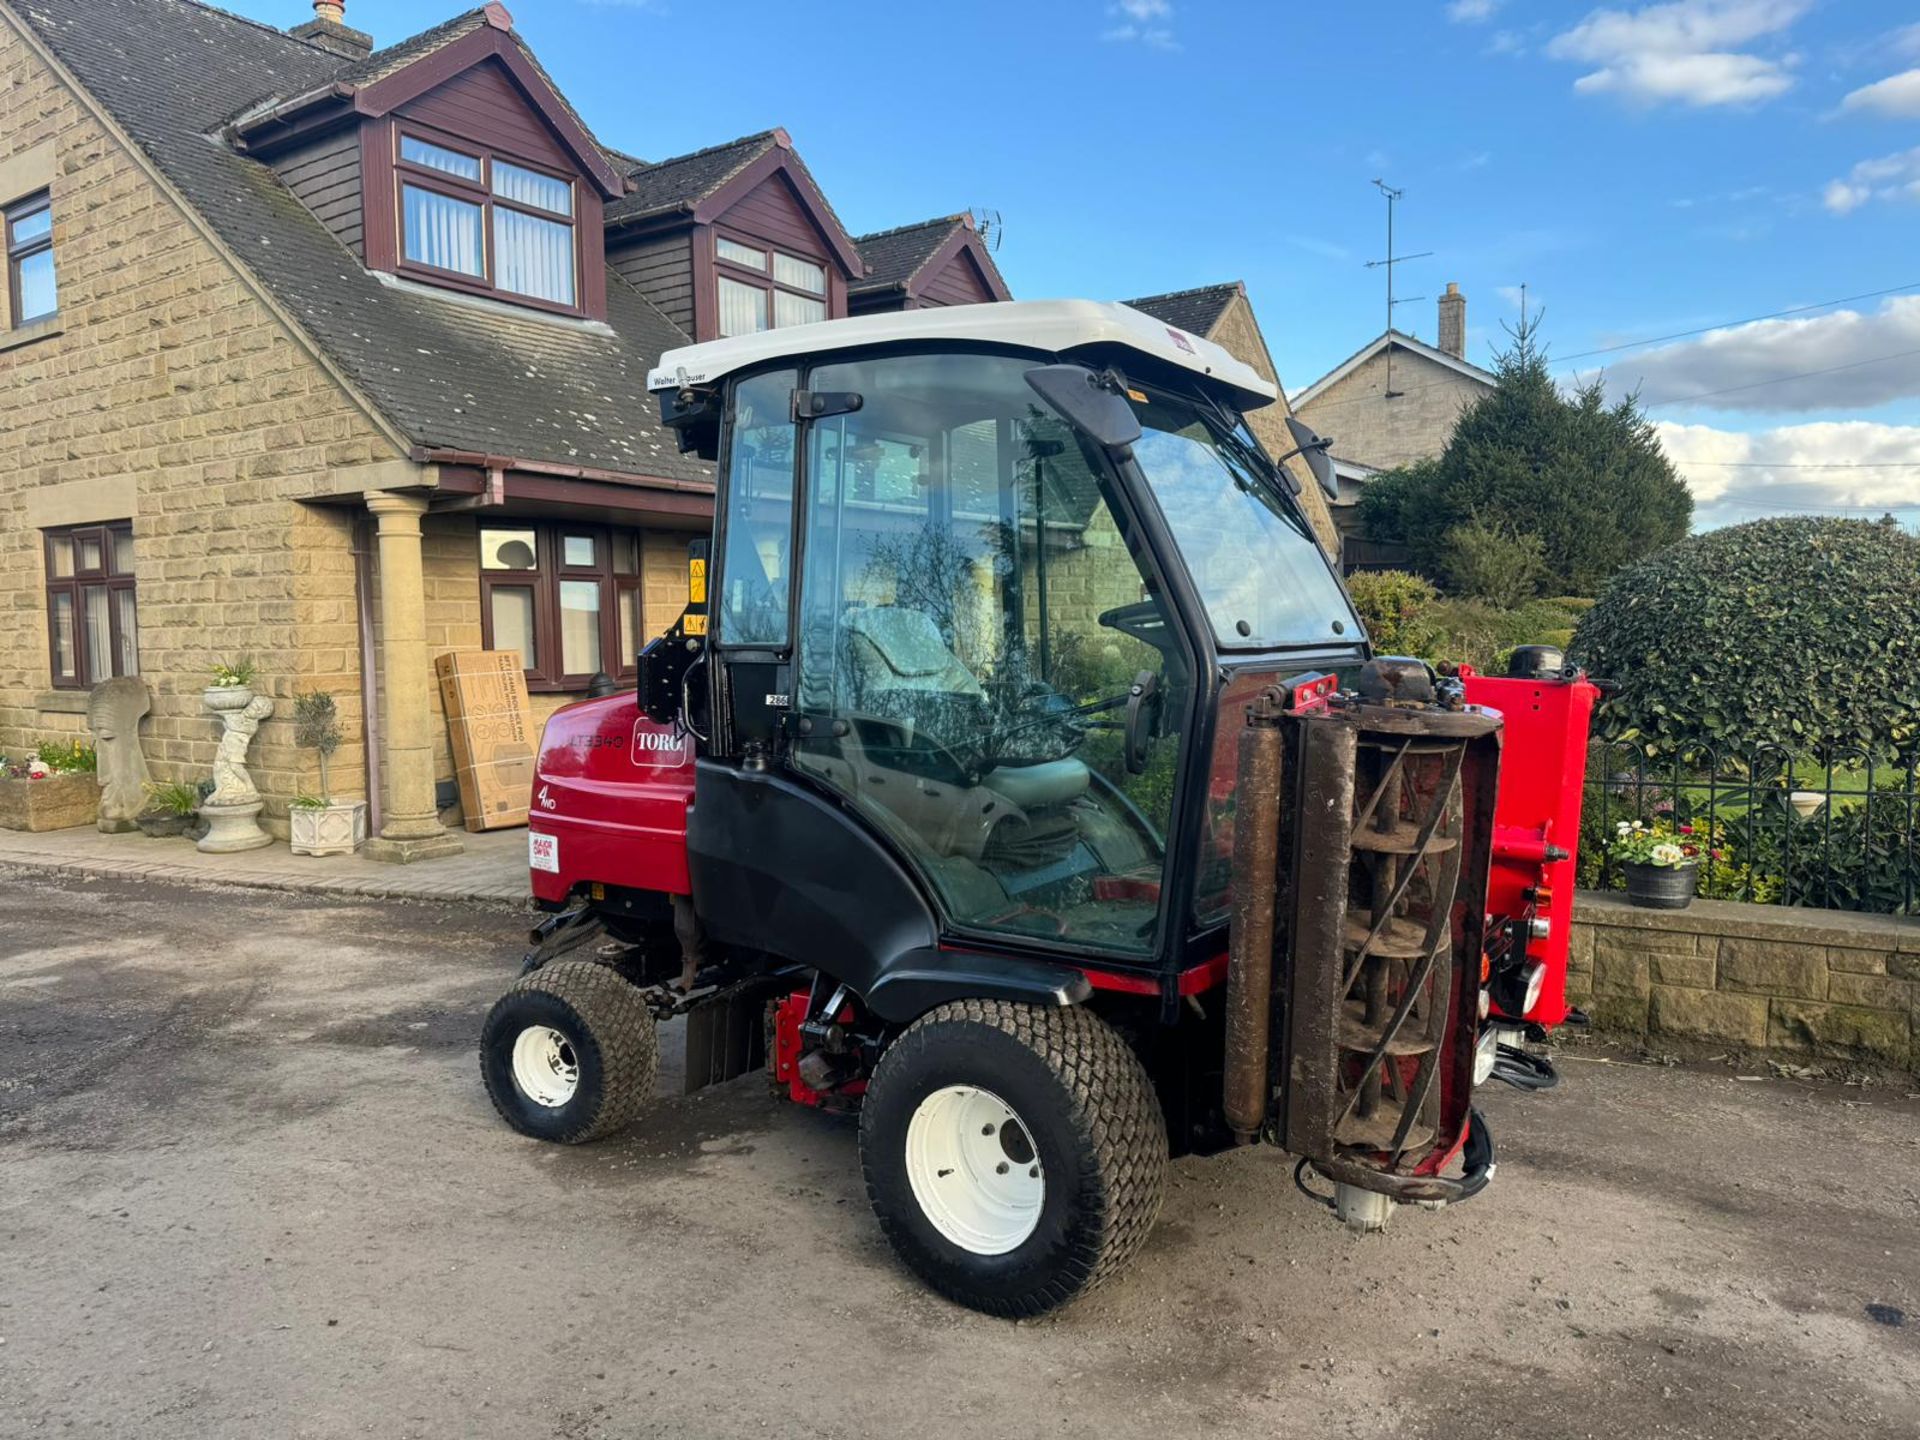 2016 TORO LT3340 4WD 3 GANG RIDE ON CYLINDER MOWER WITH CAB AND AIR CON *PLUS VAT* - Image 11 of 19